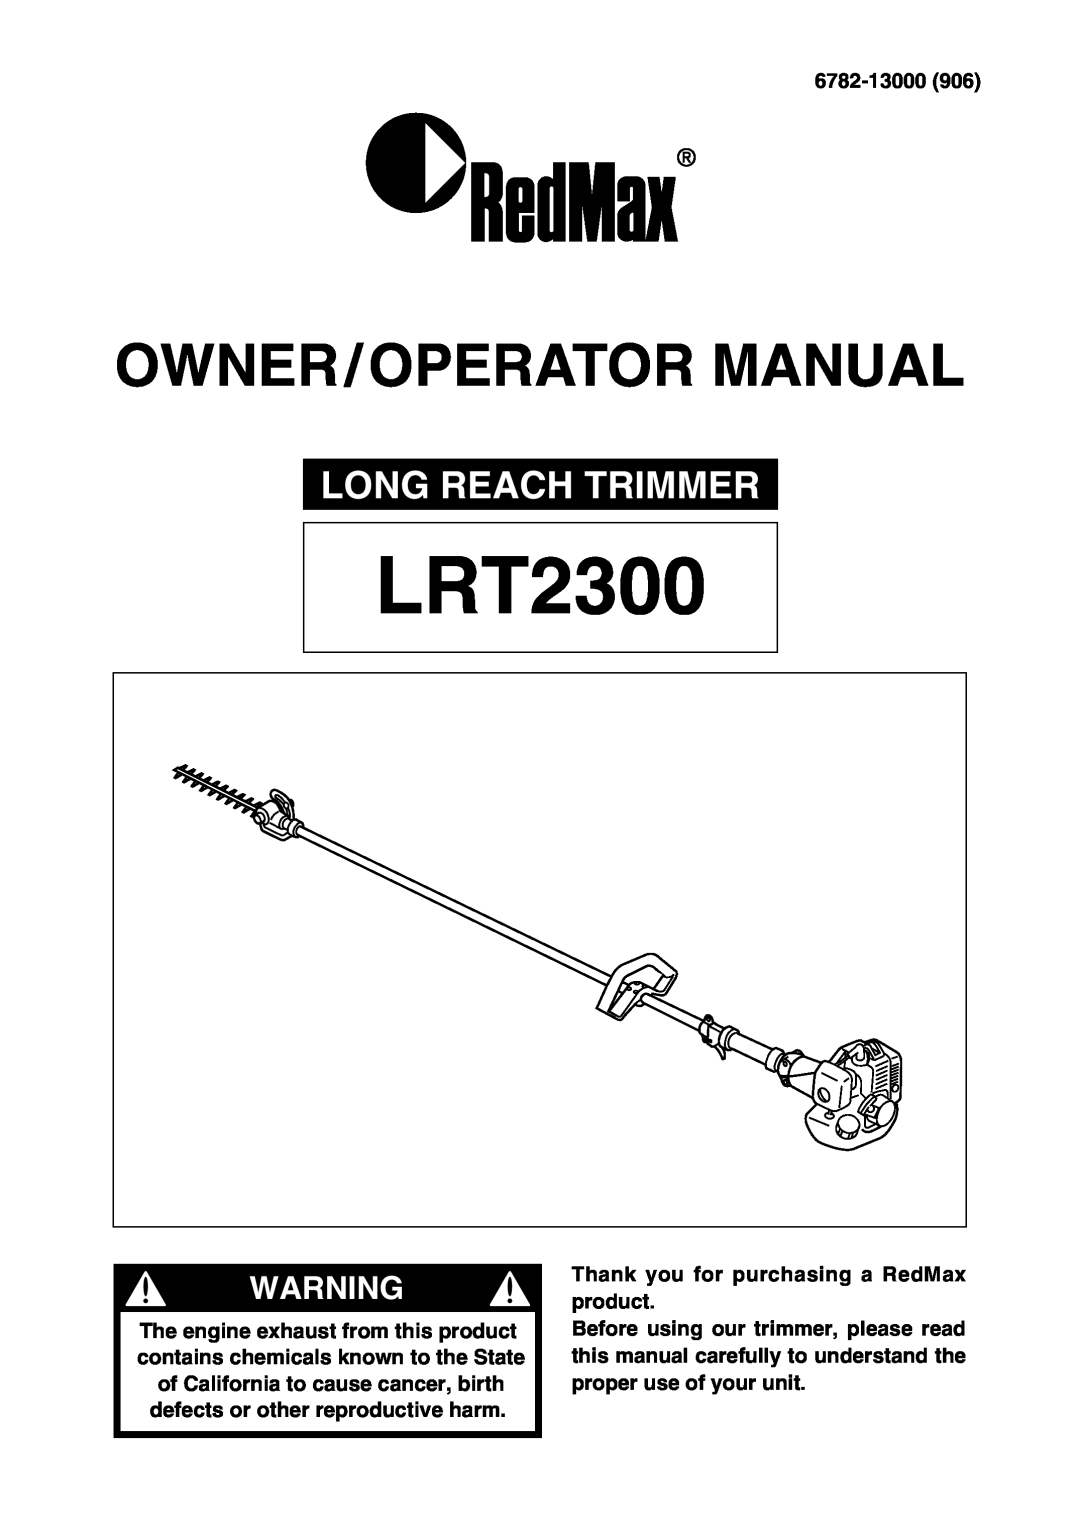 Zenoah LRT2300 manual Owner/Operator Manual, Long Reach Trimmer, 6782-13000906, Thank you for purchasing a RedMax product 